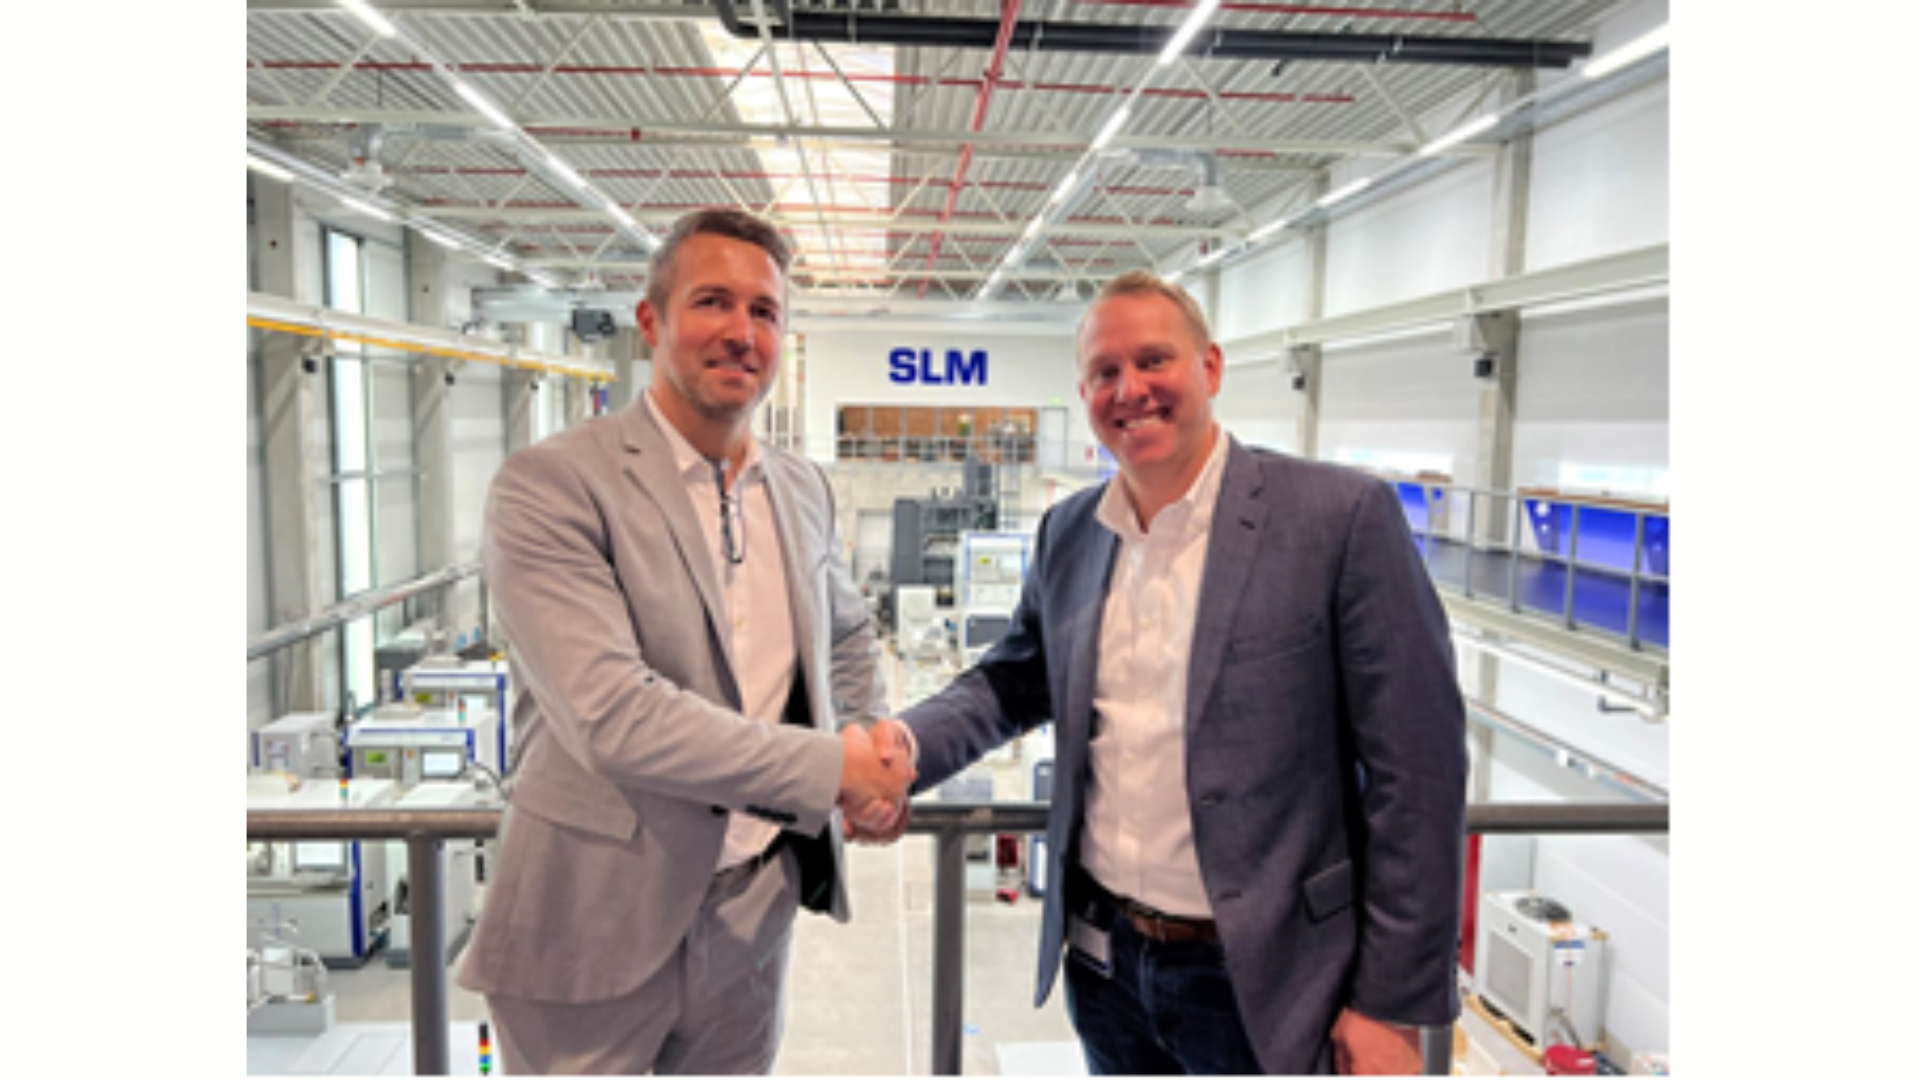 PrintRite3D® in-process quality assurance solution will be certified as PrintRite3D Ready for SLM’s metal additive manufacturing machines.